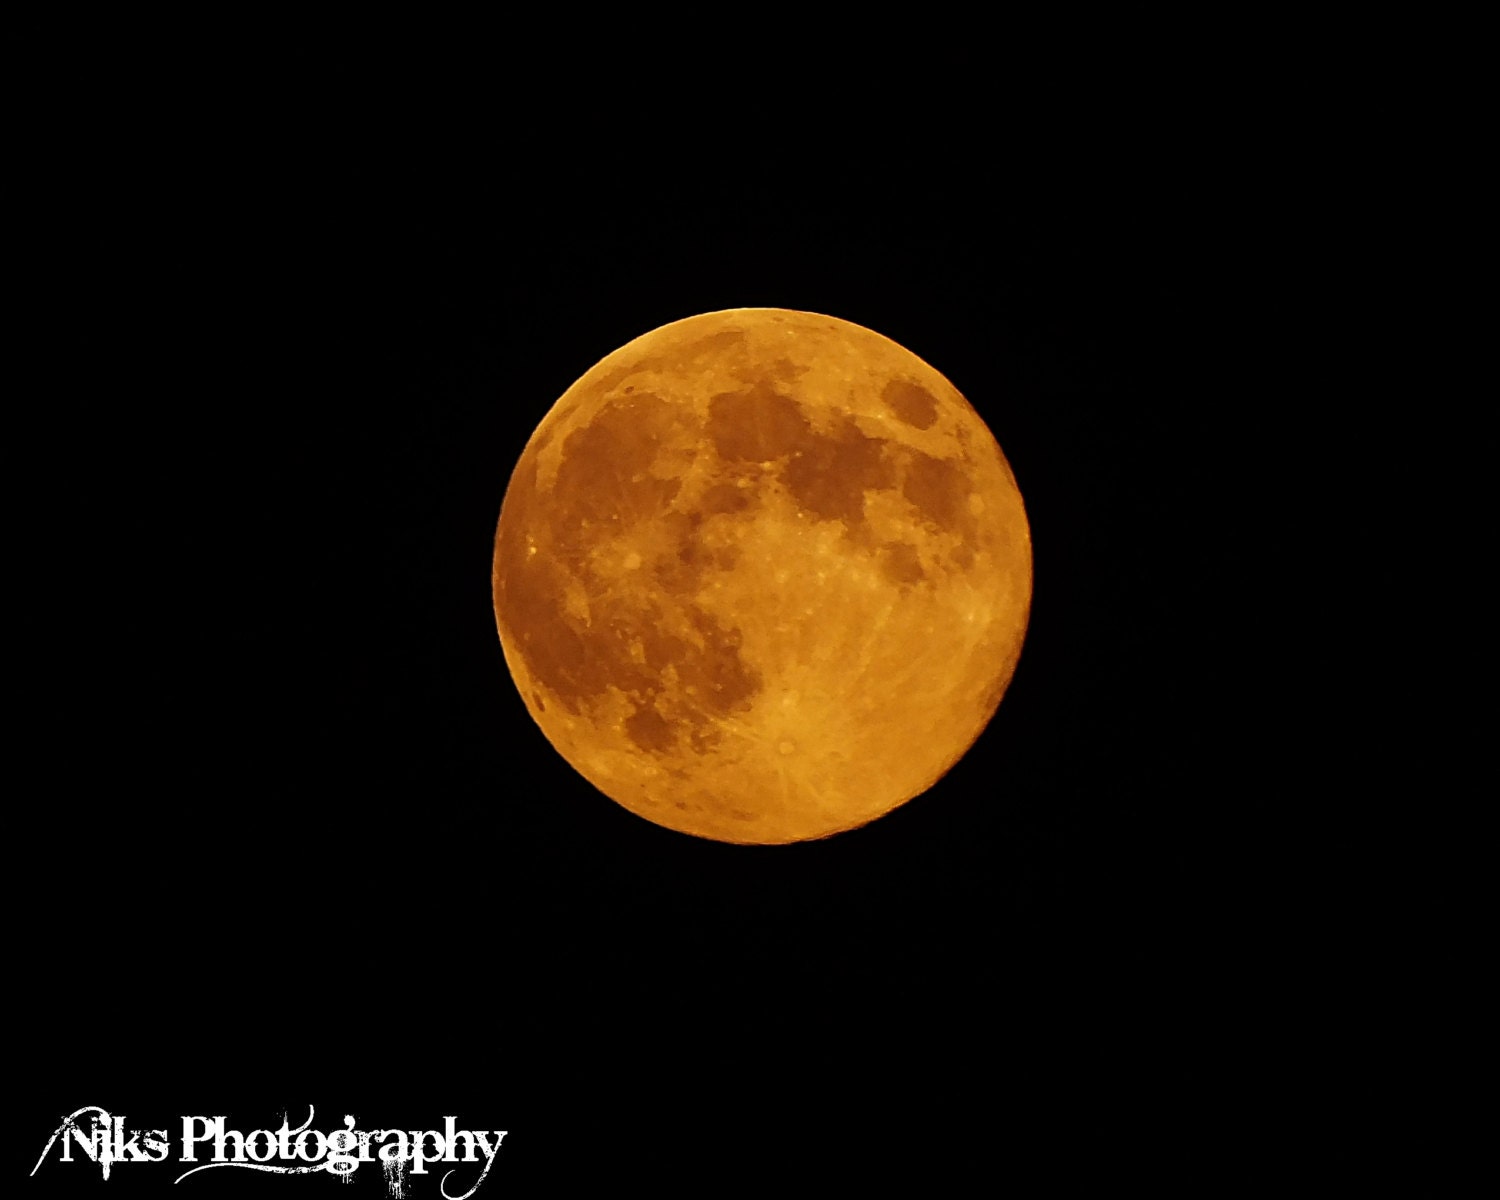 Harvest  Moon Halloween Photograph Night Skyscape Photo Orange Full Moon Lunar Picture Decor Digital Download File Instant - NiksPhotography